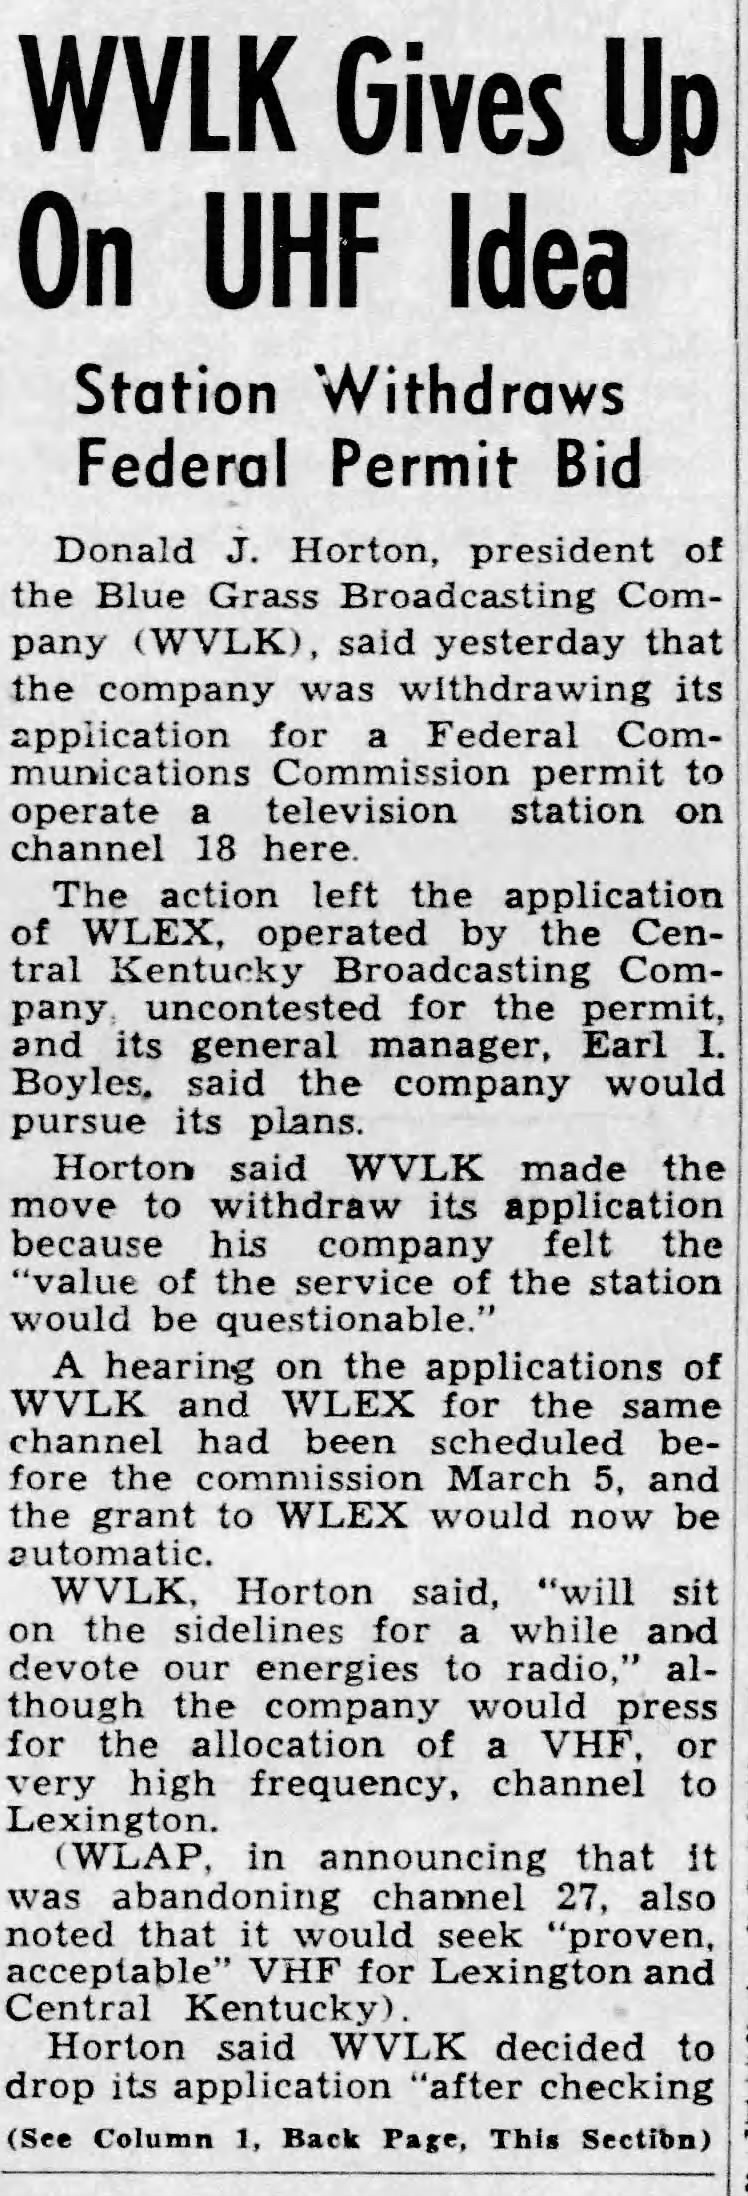 WVLK Gives Up On UHF Idea: Station Withdraws Federal Permit Bid